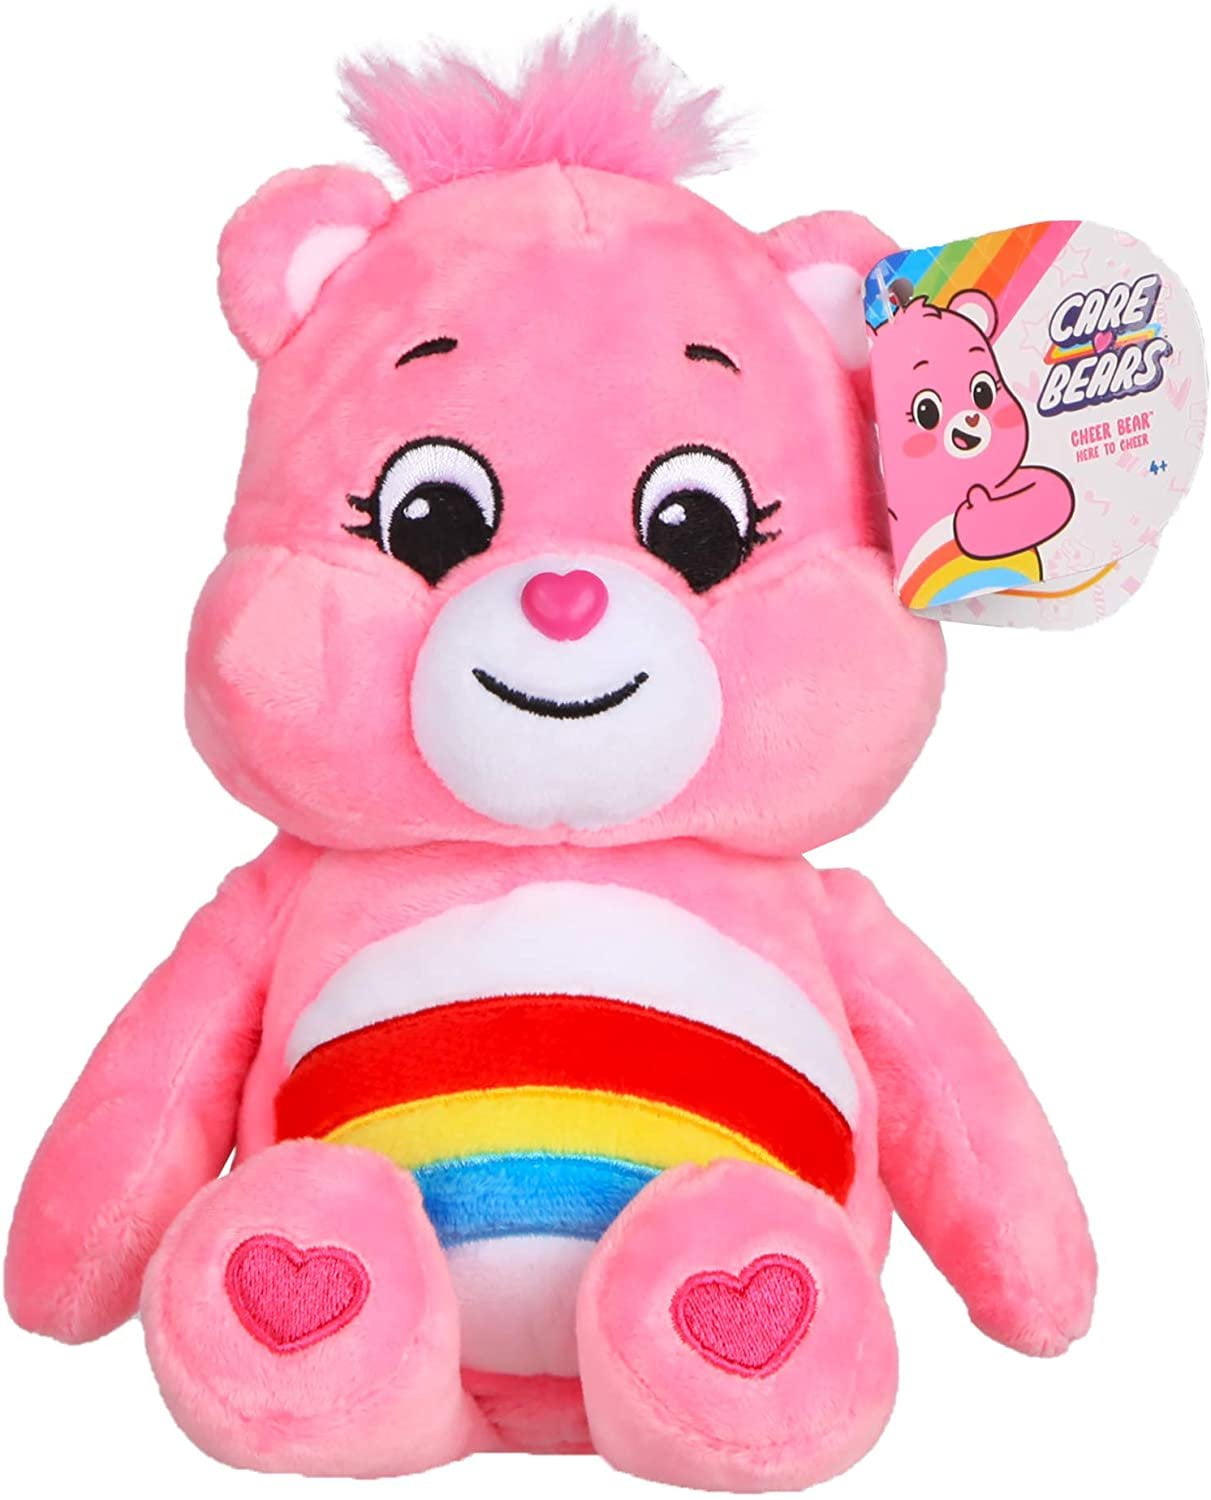 Care Bears Cheer Bear 35th Anniversary Collector's Edition Pink Plush 2018 2019 for sale online 